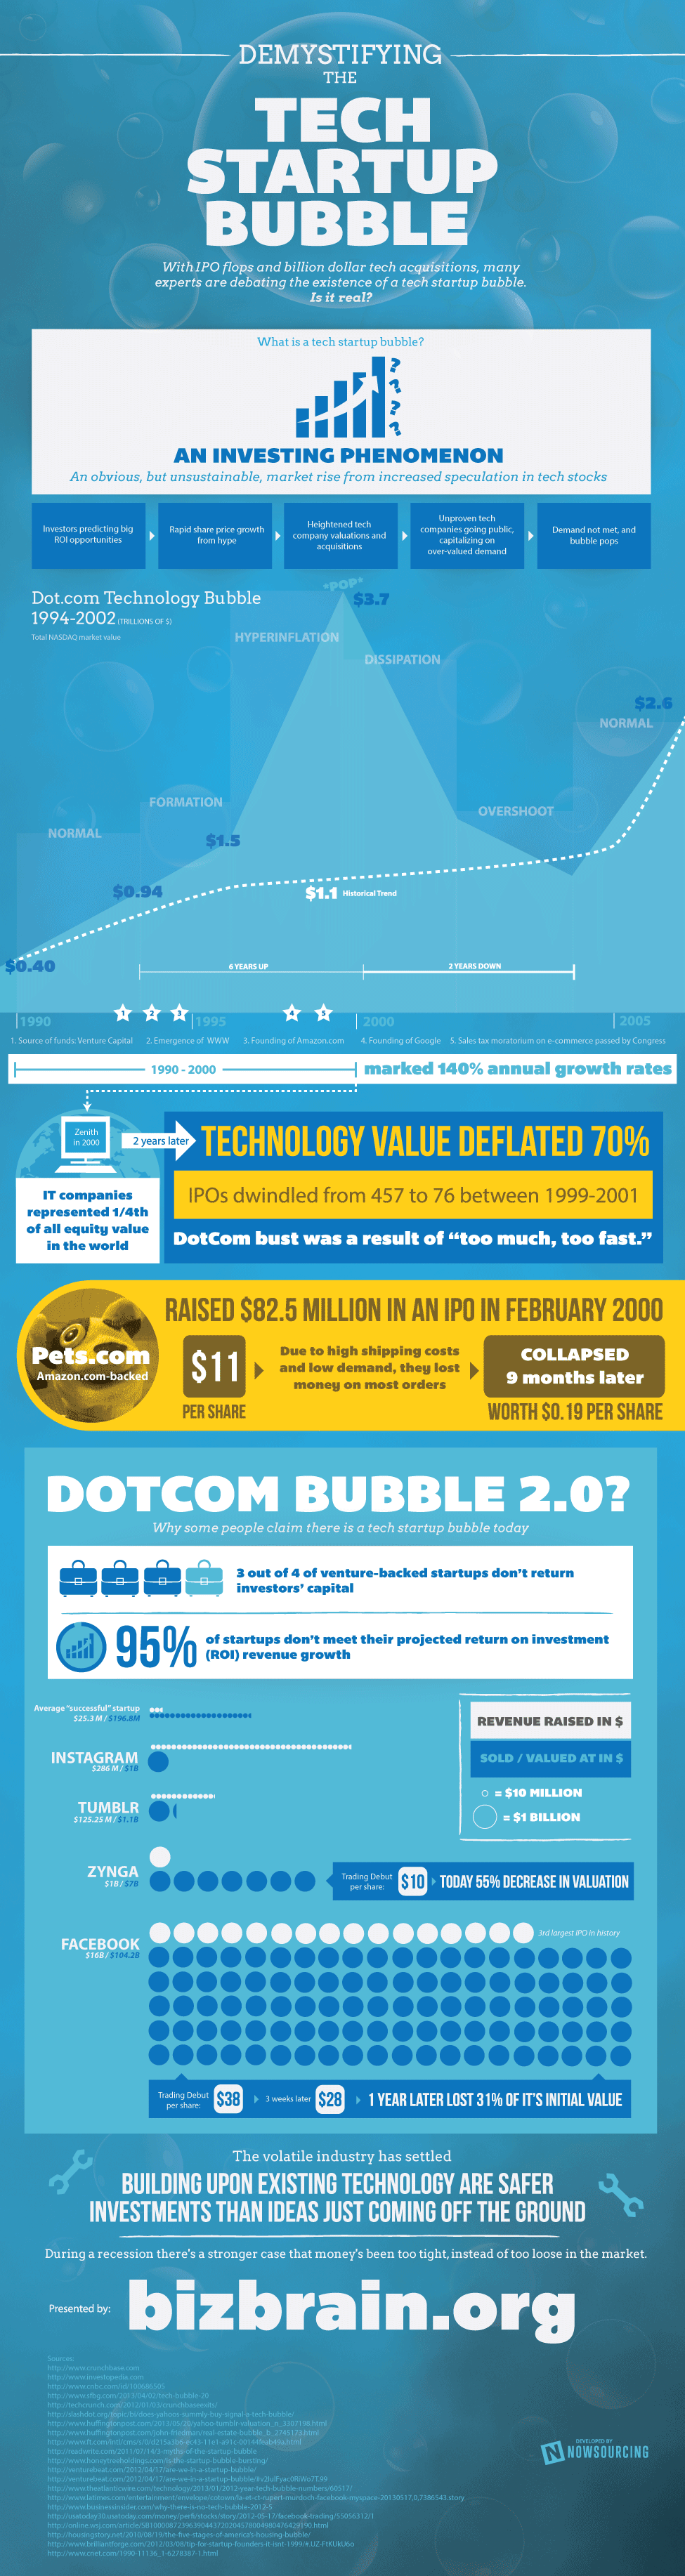 Demystifying the Tech Startup Bubble